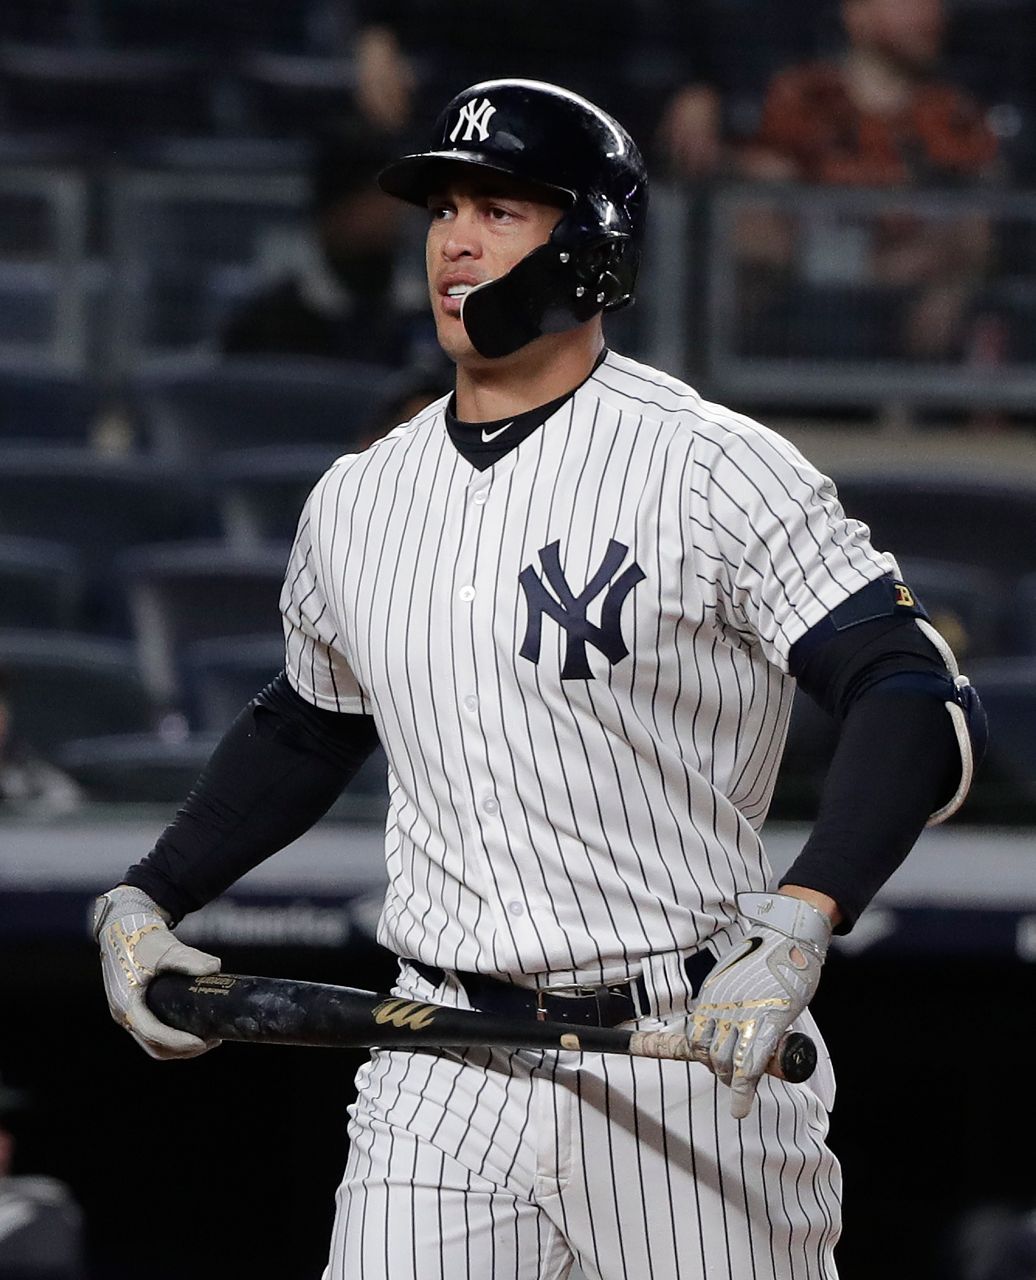 Why has Giancarlo Stanton struggled so much with fastball yankees